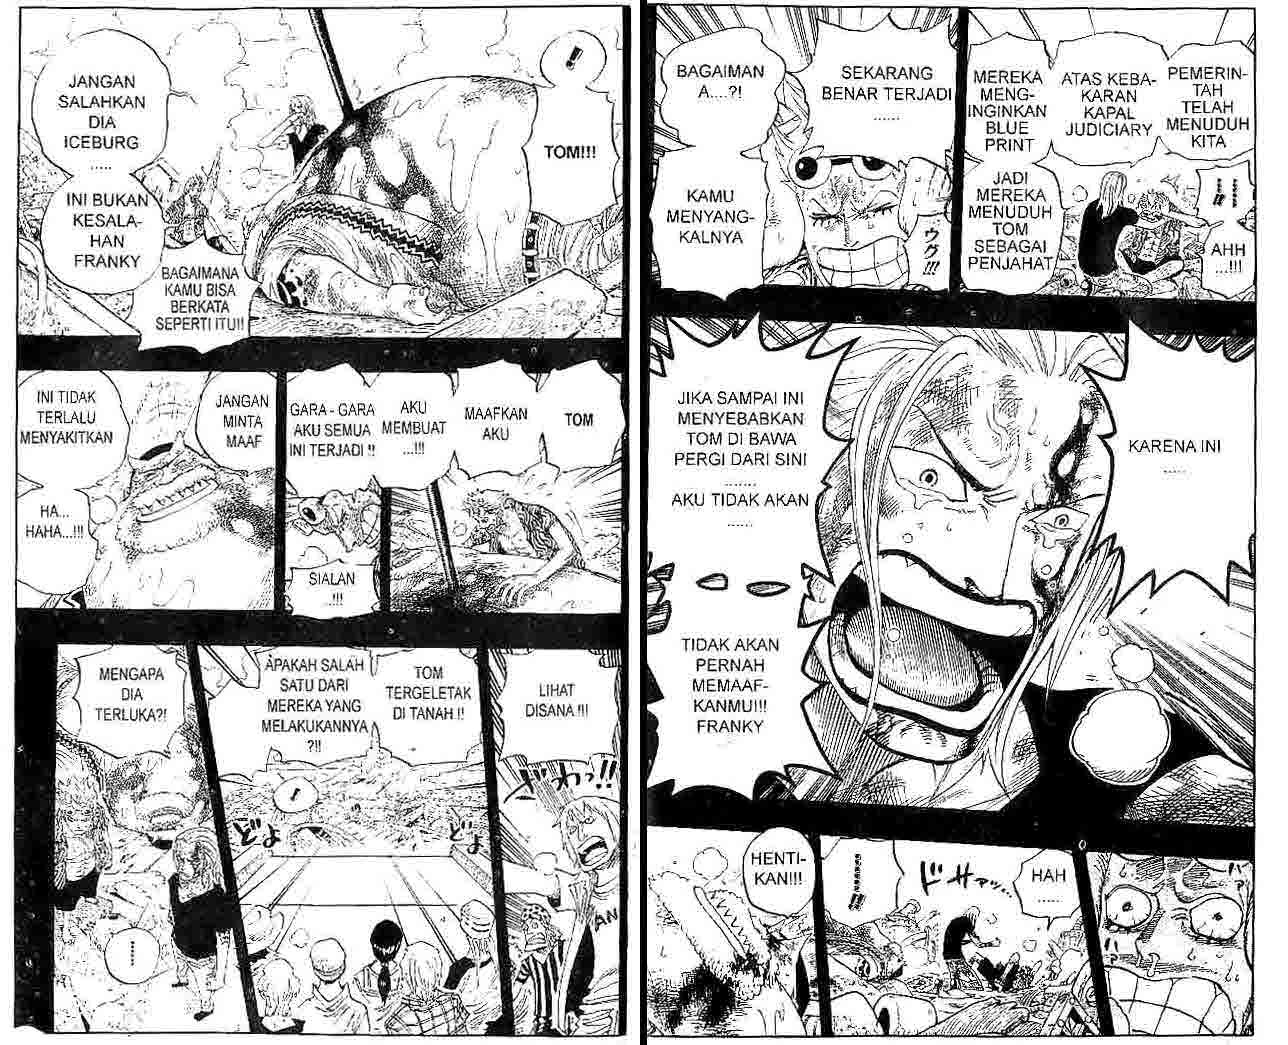 One Piece Chapter 356